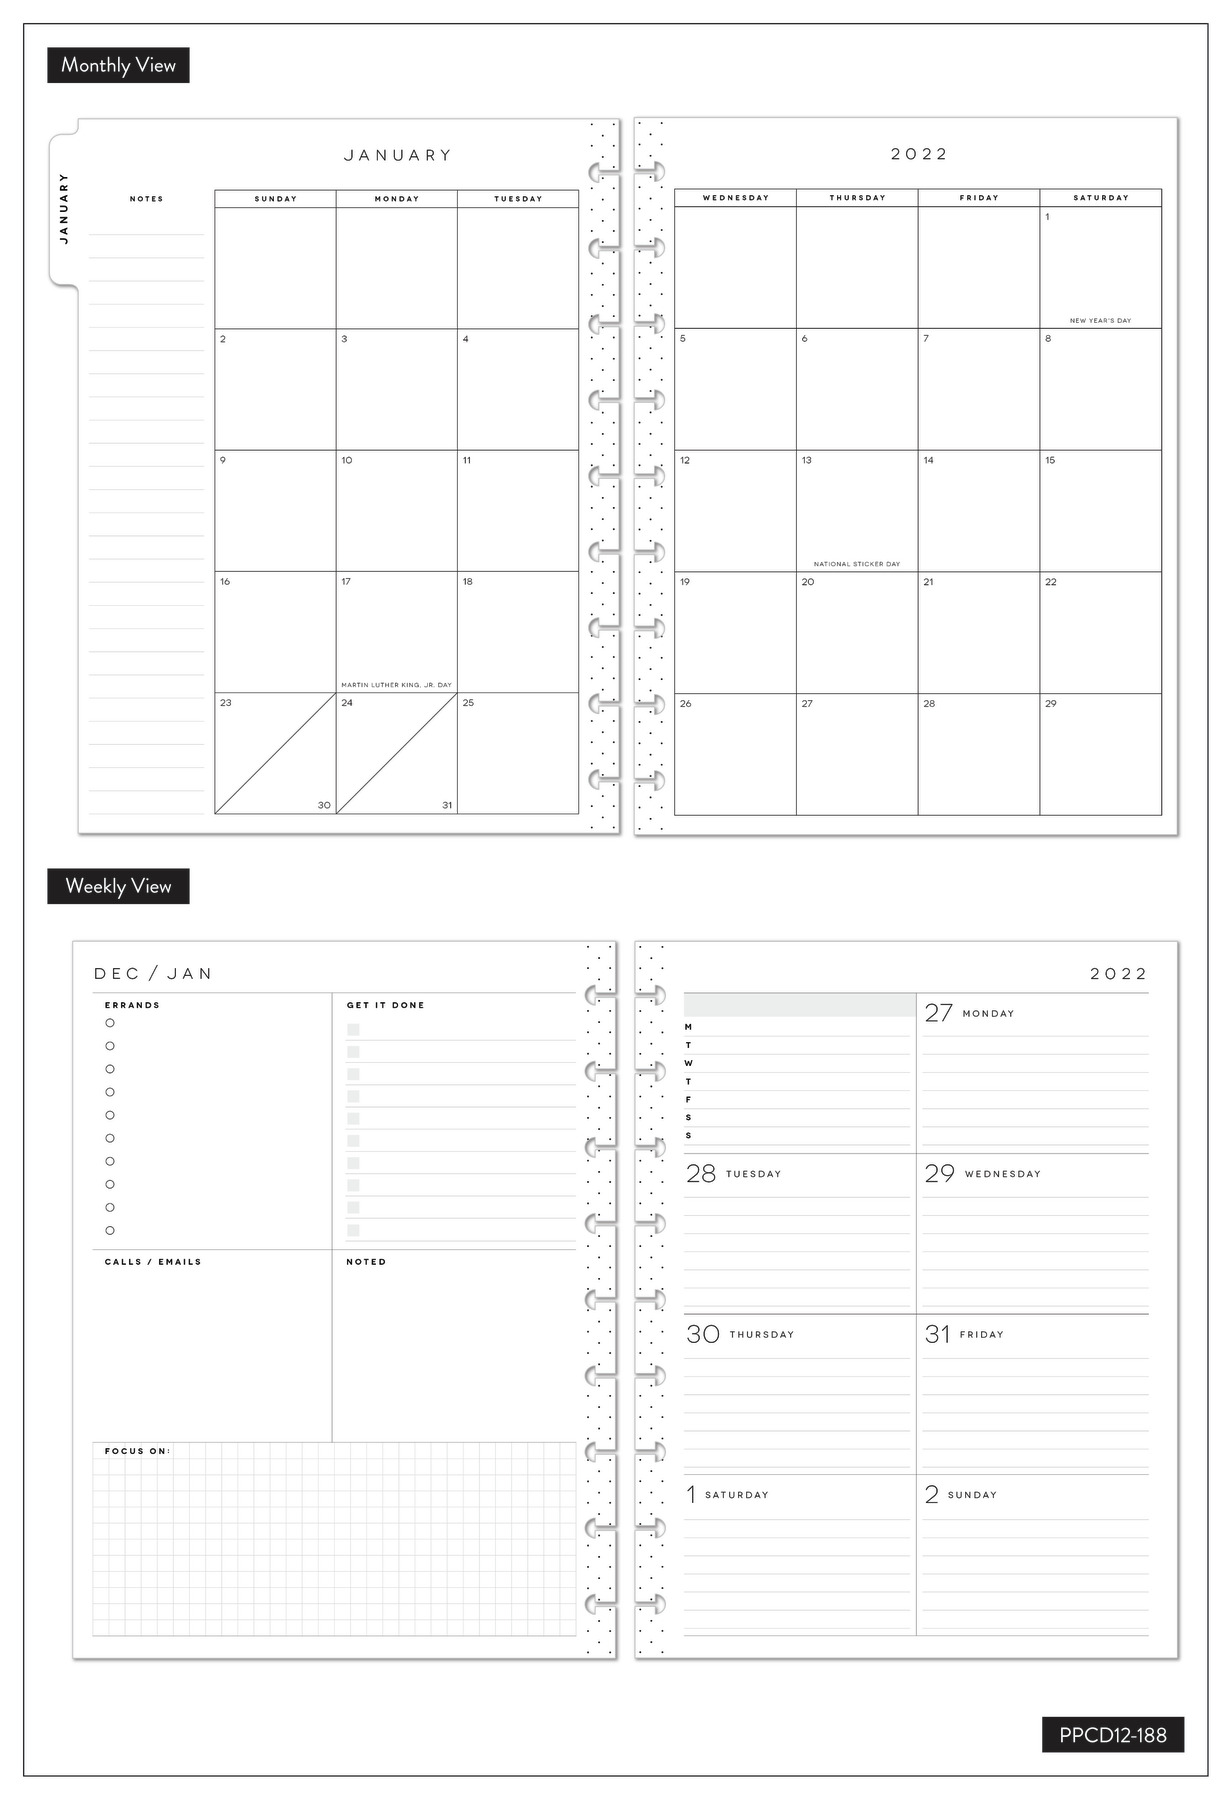 The Happy Planner, Classic 12 Month Planner, 2022, Midnight Dreams, 8.75" x 1.37" x 9.75" - image 3 of 8